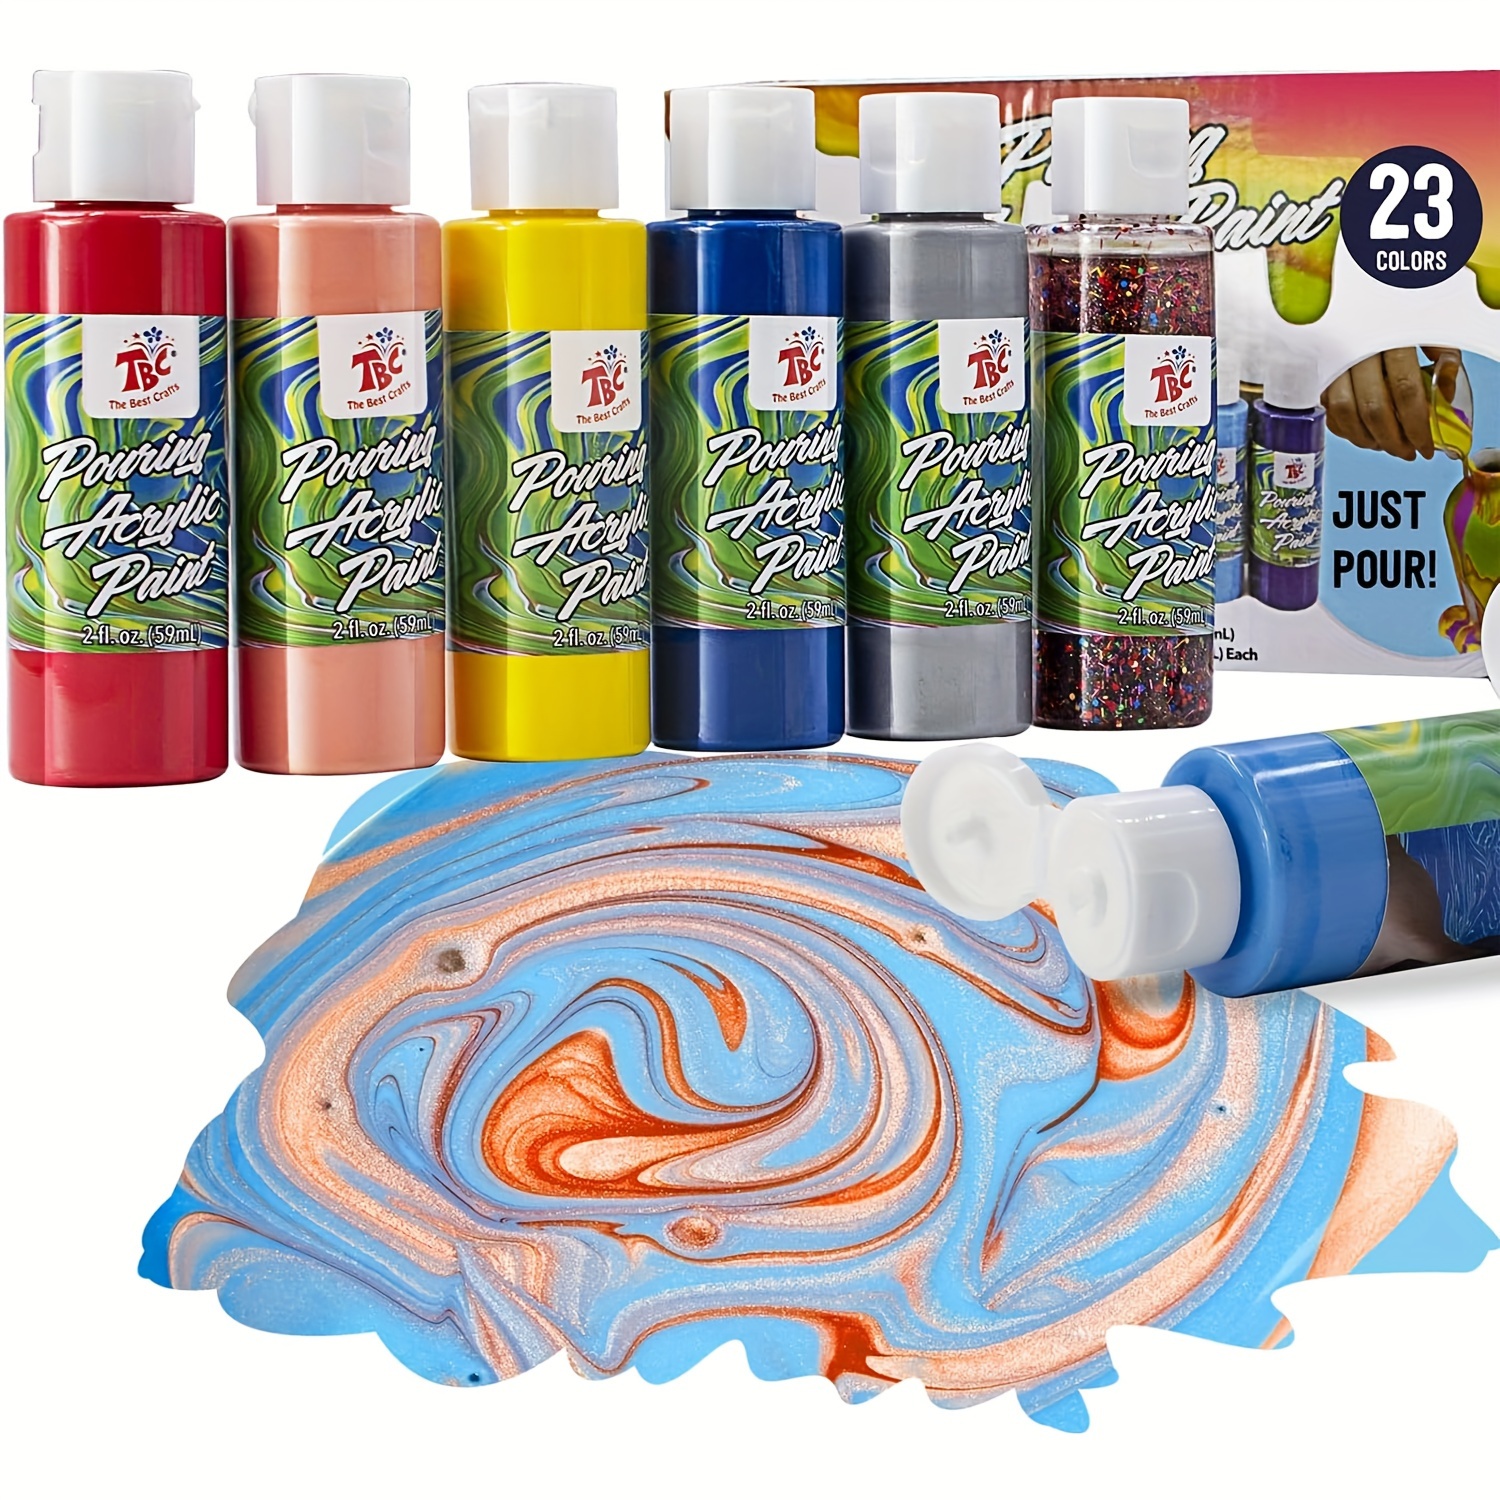 

23pcs Tbc The Best Crafts Acrylic Pouring Paint 23 Bottles (2 Oz/60ml) Acrylic Paint Vibrant Colors Non Toxic Pre-mixed High Flow Craft Paint For Pouring On Canvas Stonge Wood Plaster And More